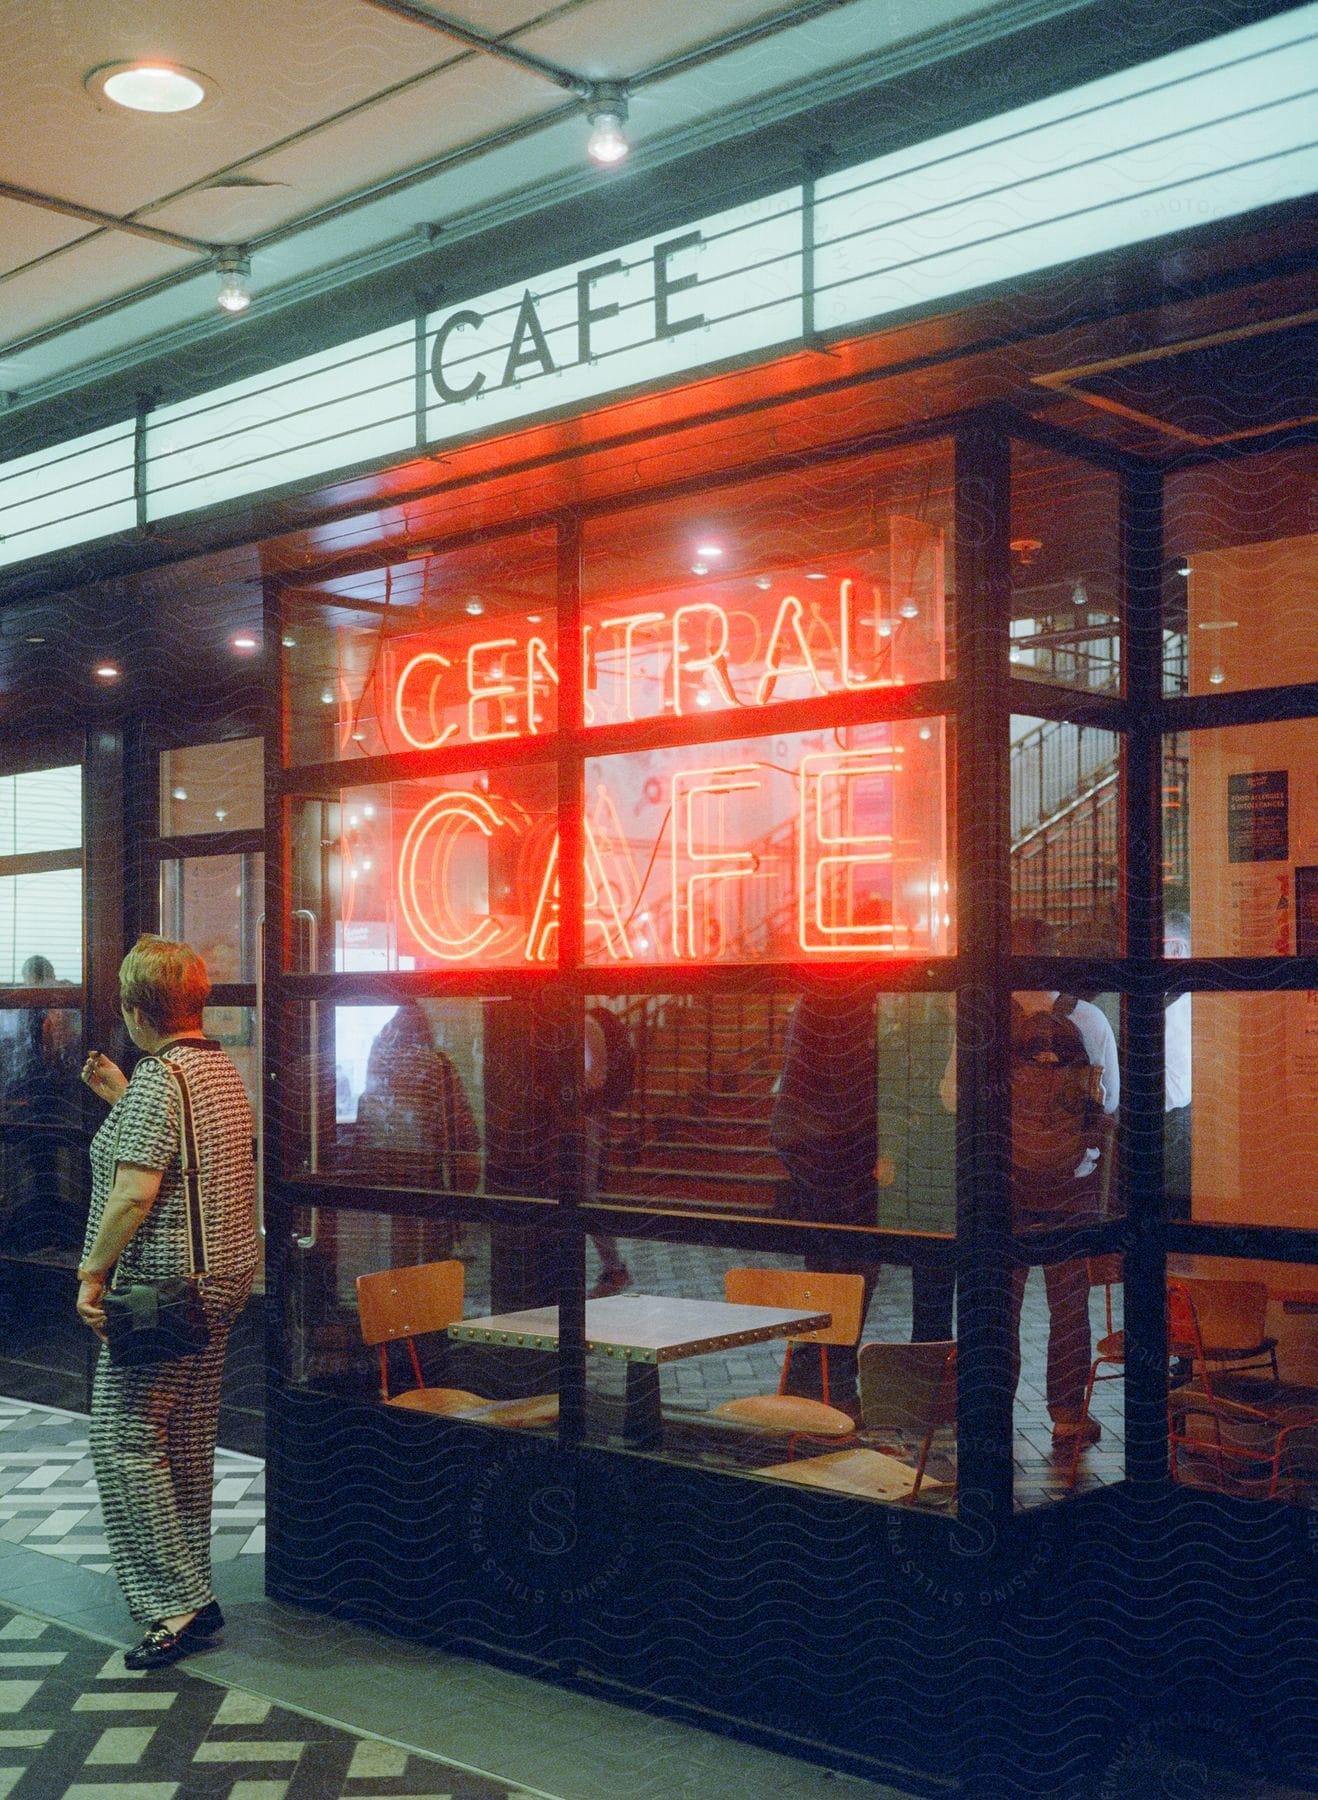 Exterior of a cafe at night with a neon sign